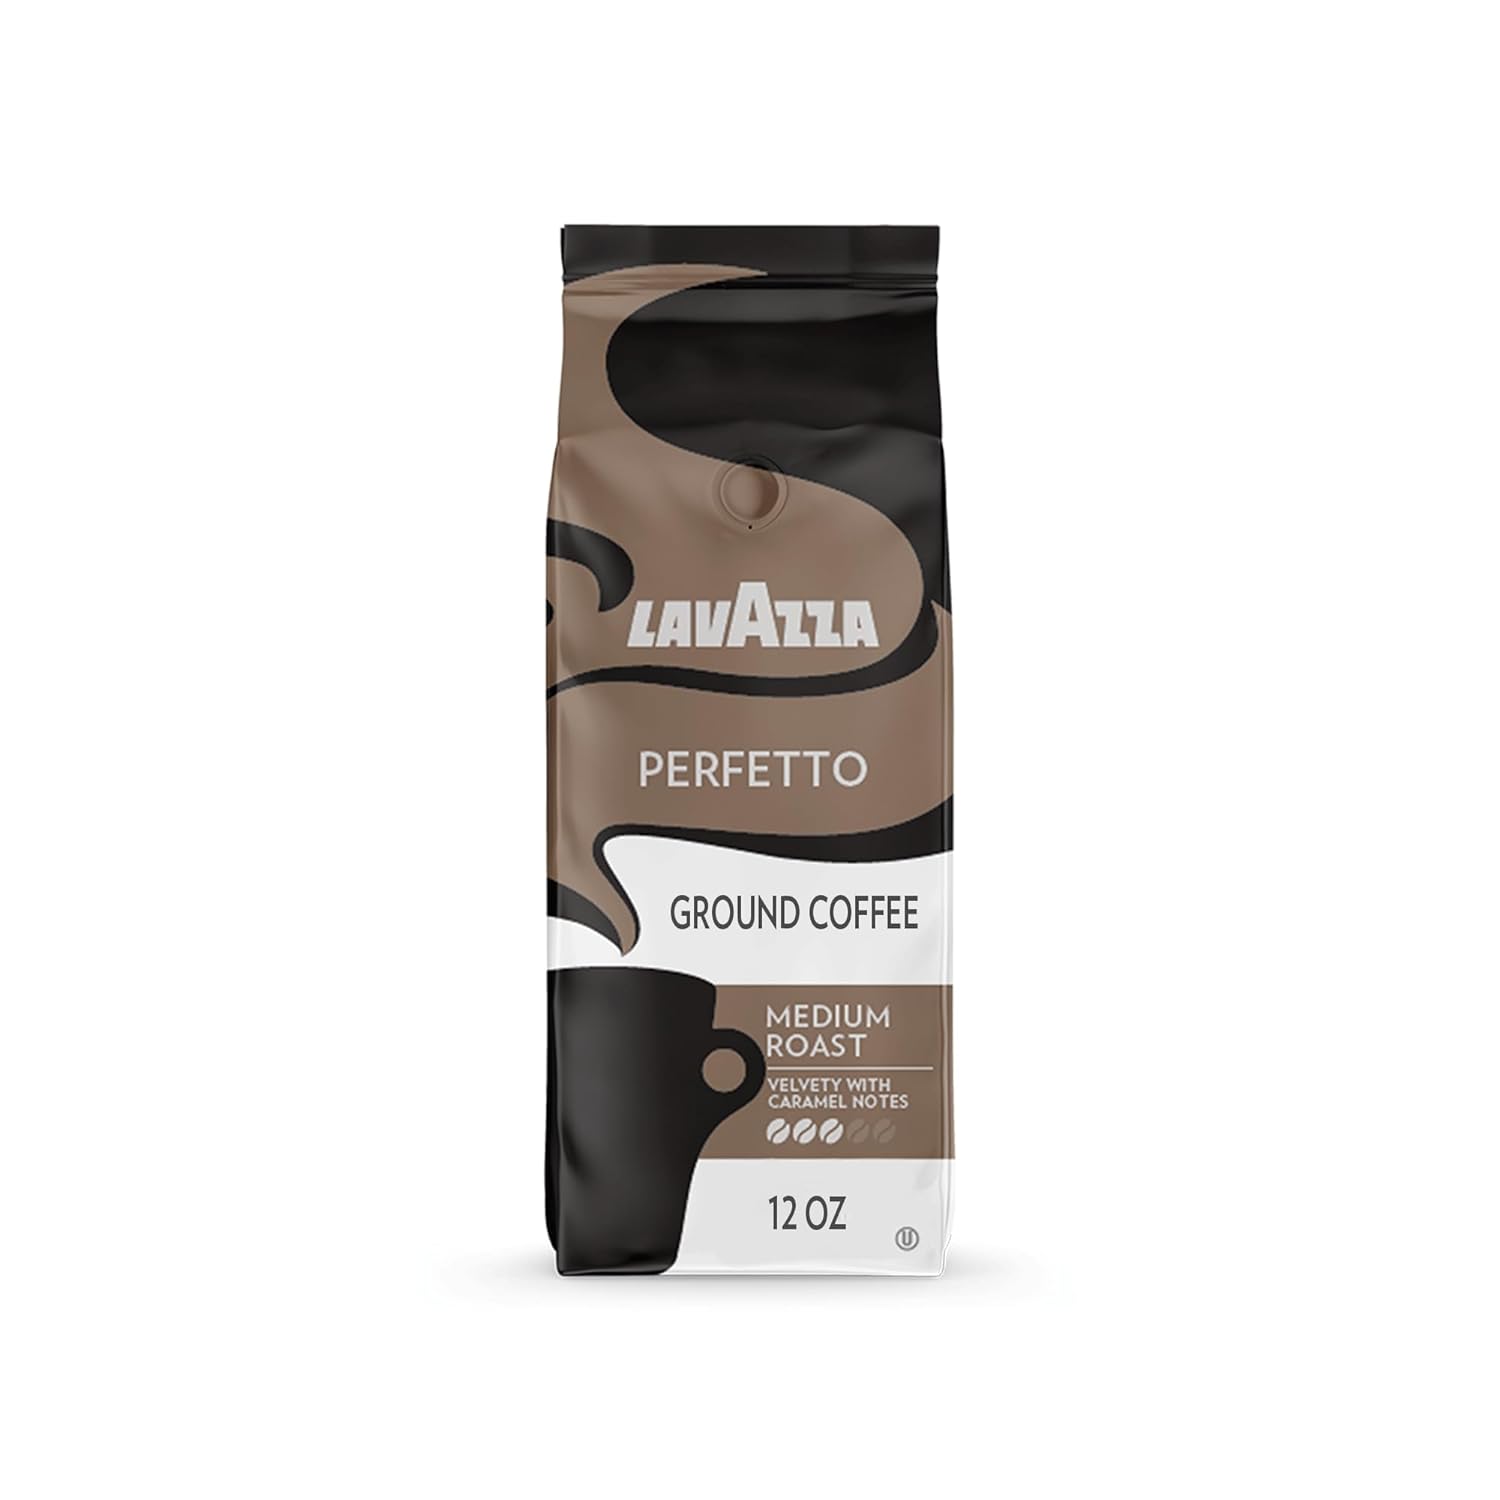 Lavazza Perfetto Ground Coffee Blend, Dark Roast, Value Pack, Non-GMO, 100% Arabica, Full-bodied, 12 Ounce (Pack of 6) - Packaging May Vary